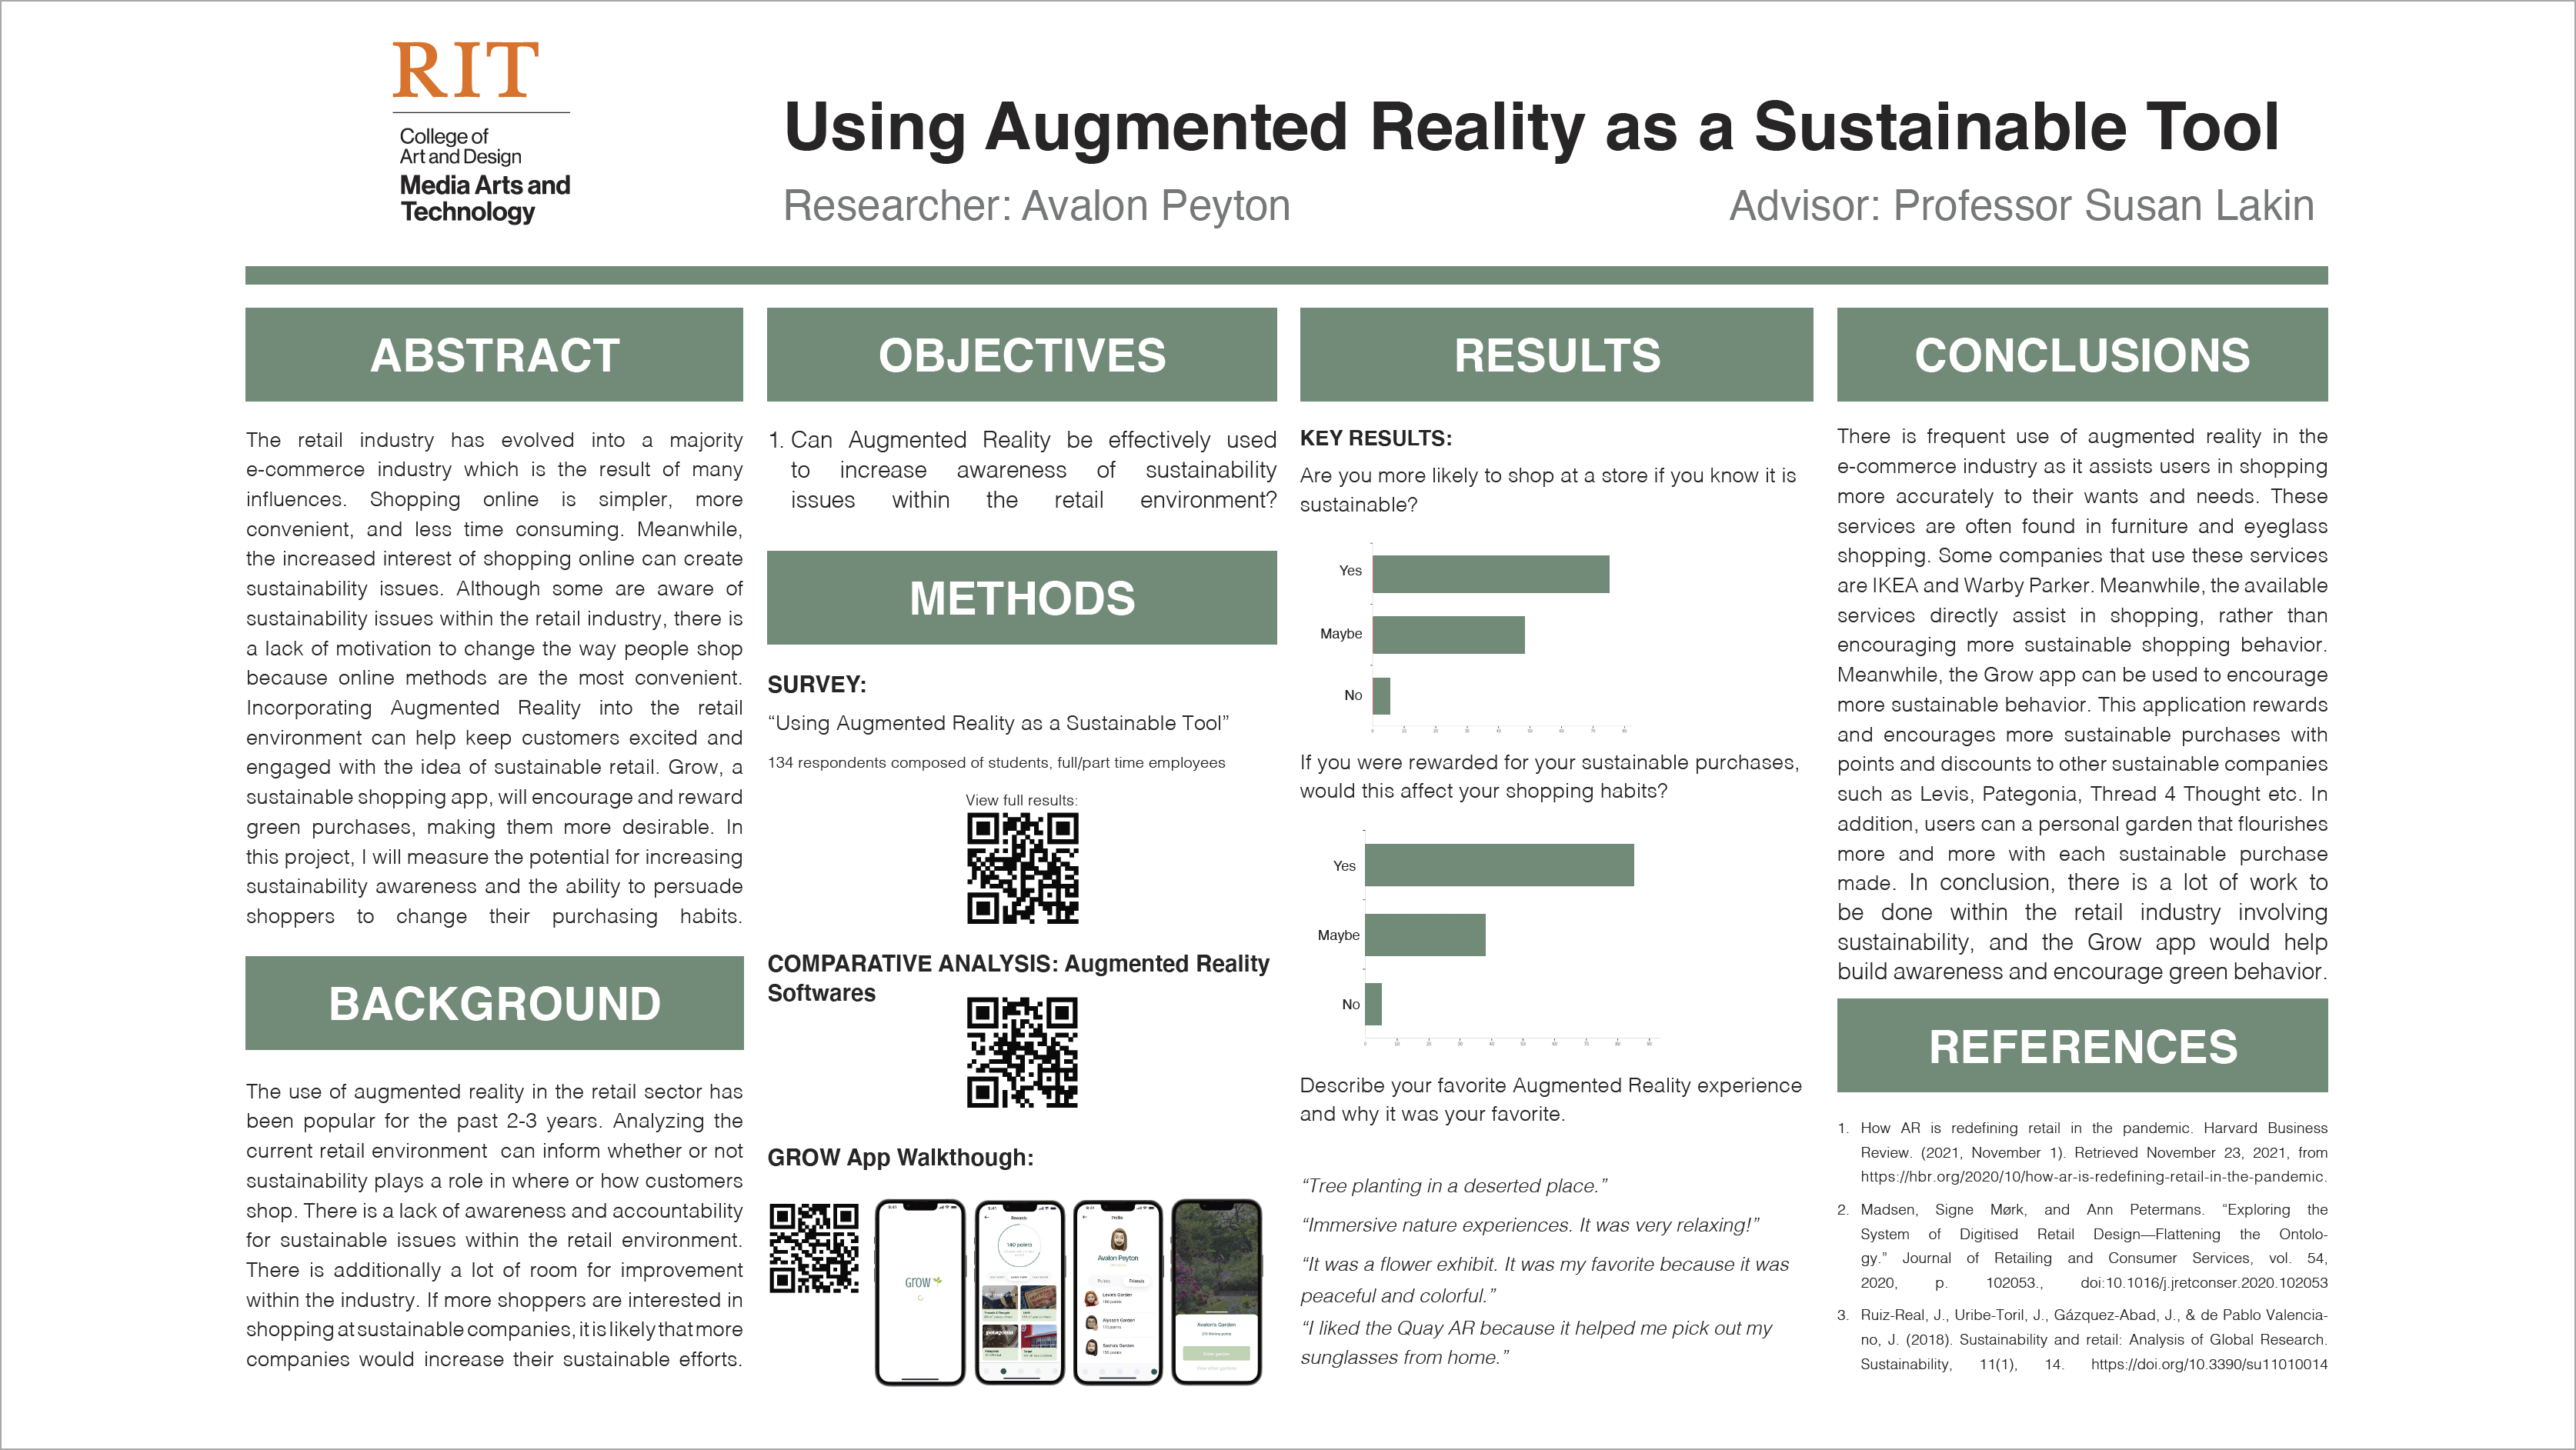 A poster highlighting research on using augmented reality as  sustainable tool.